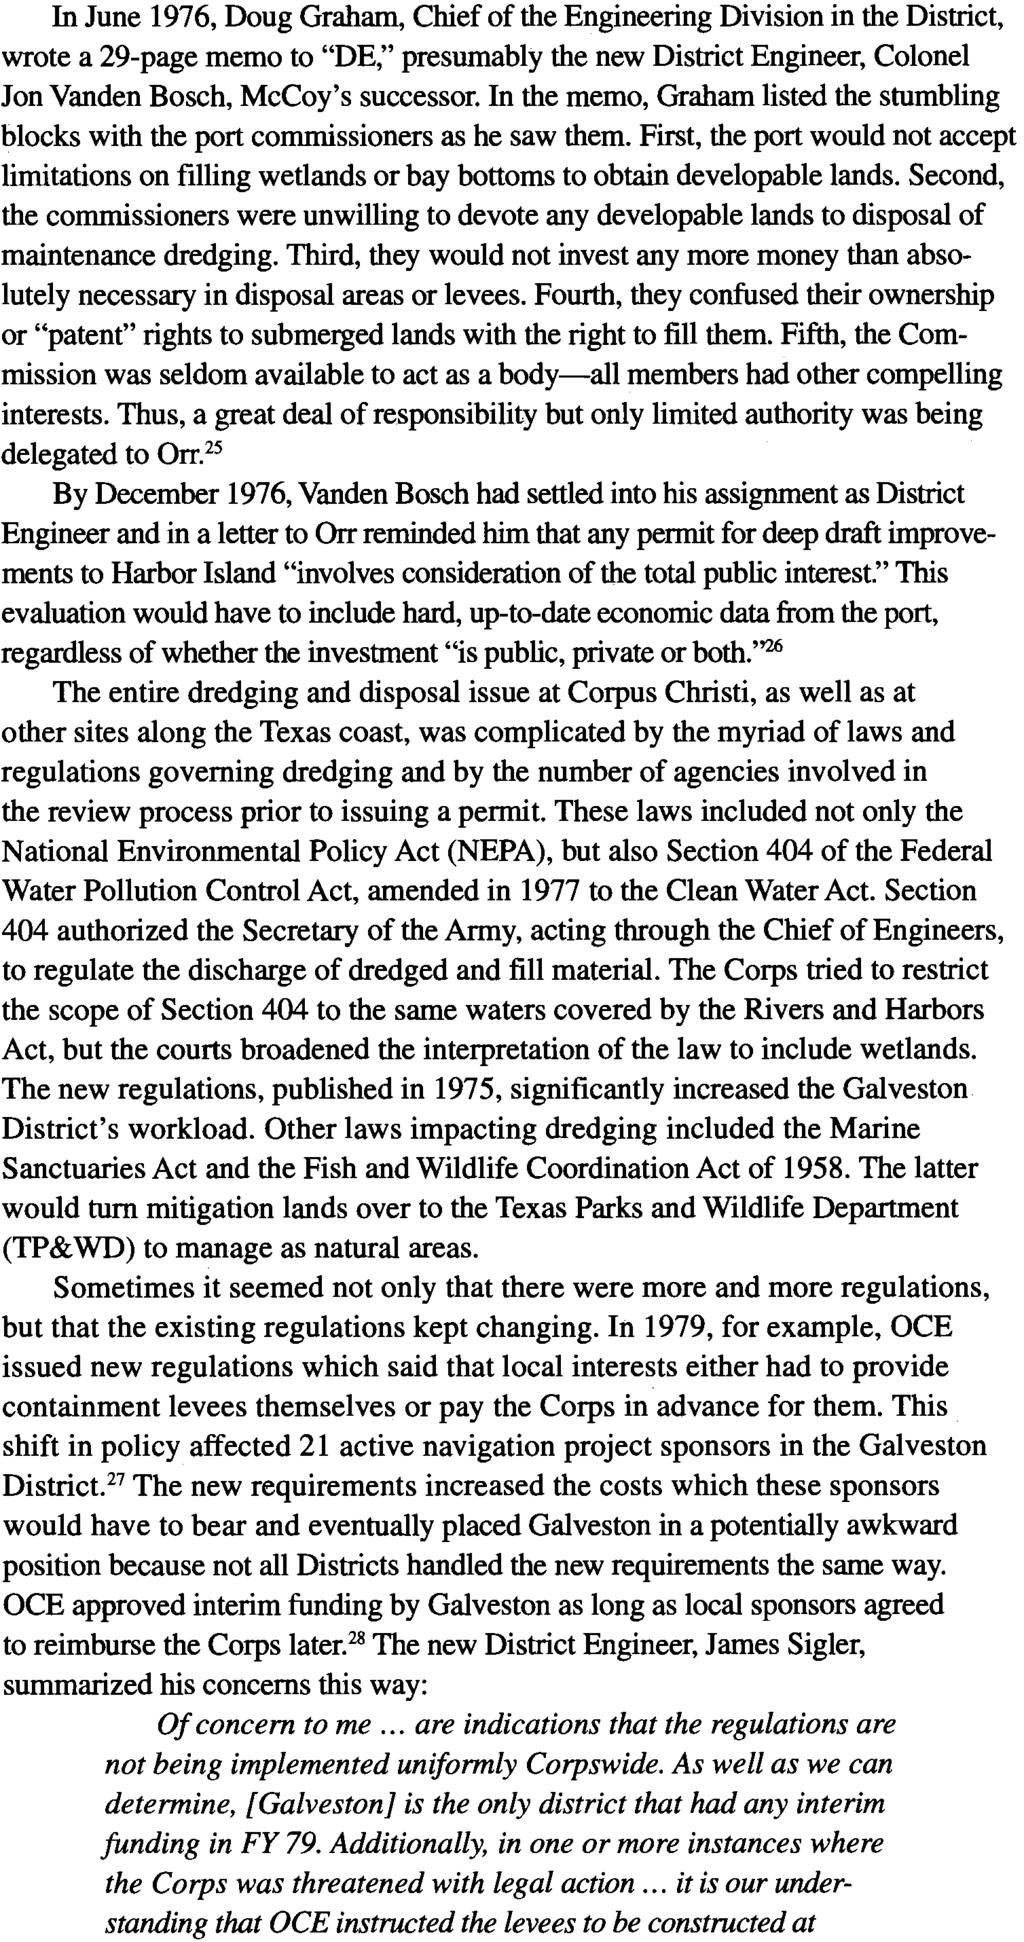 In June 1976, Doug Graham, Chief of the Engineering Division in the District,wrote a 29-page memo to "DE," presumably the new District Engineer, Colonel Jon Vanden Bosch, McCoy's successor.